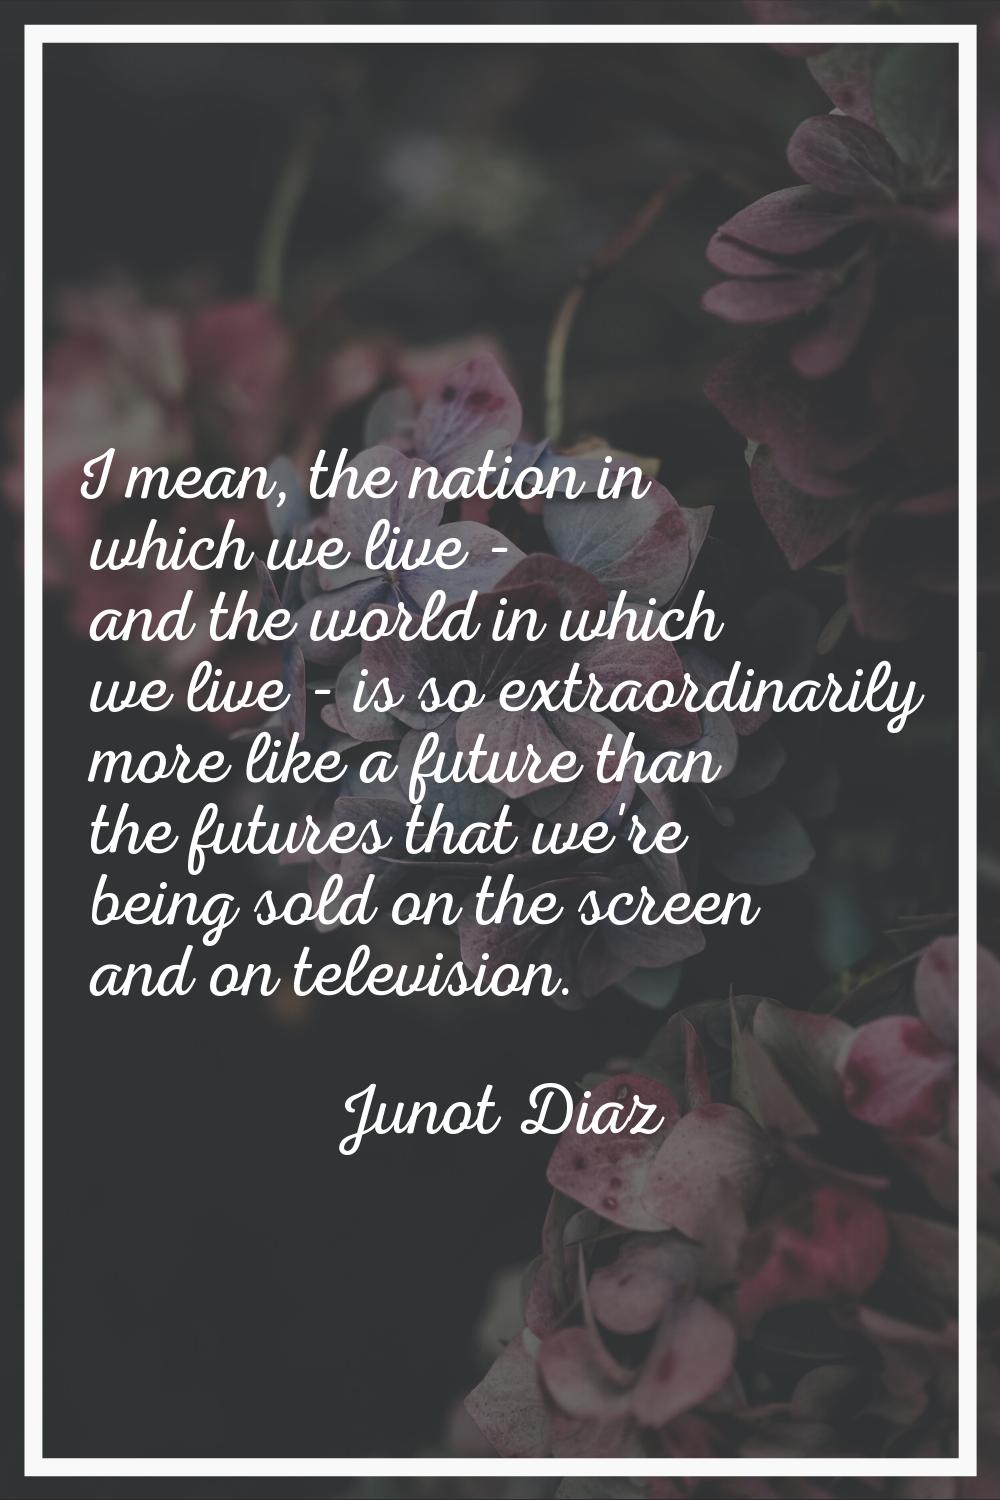 I mean, the nation in which we live - and the world in which we live - is so extraordinarily more l